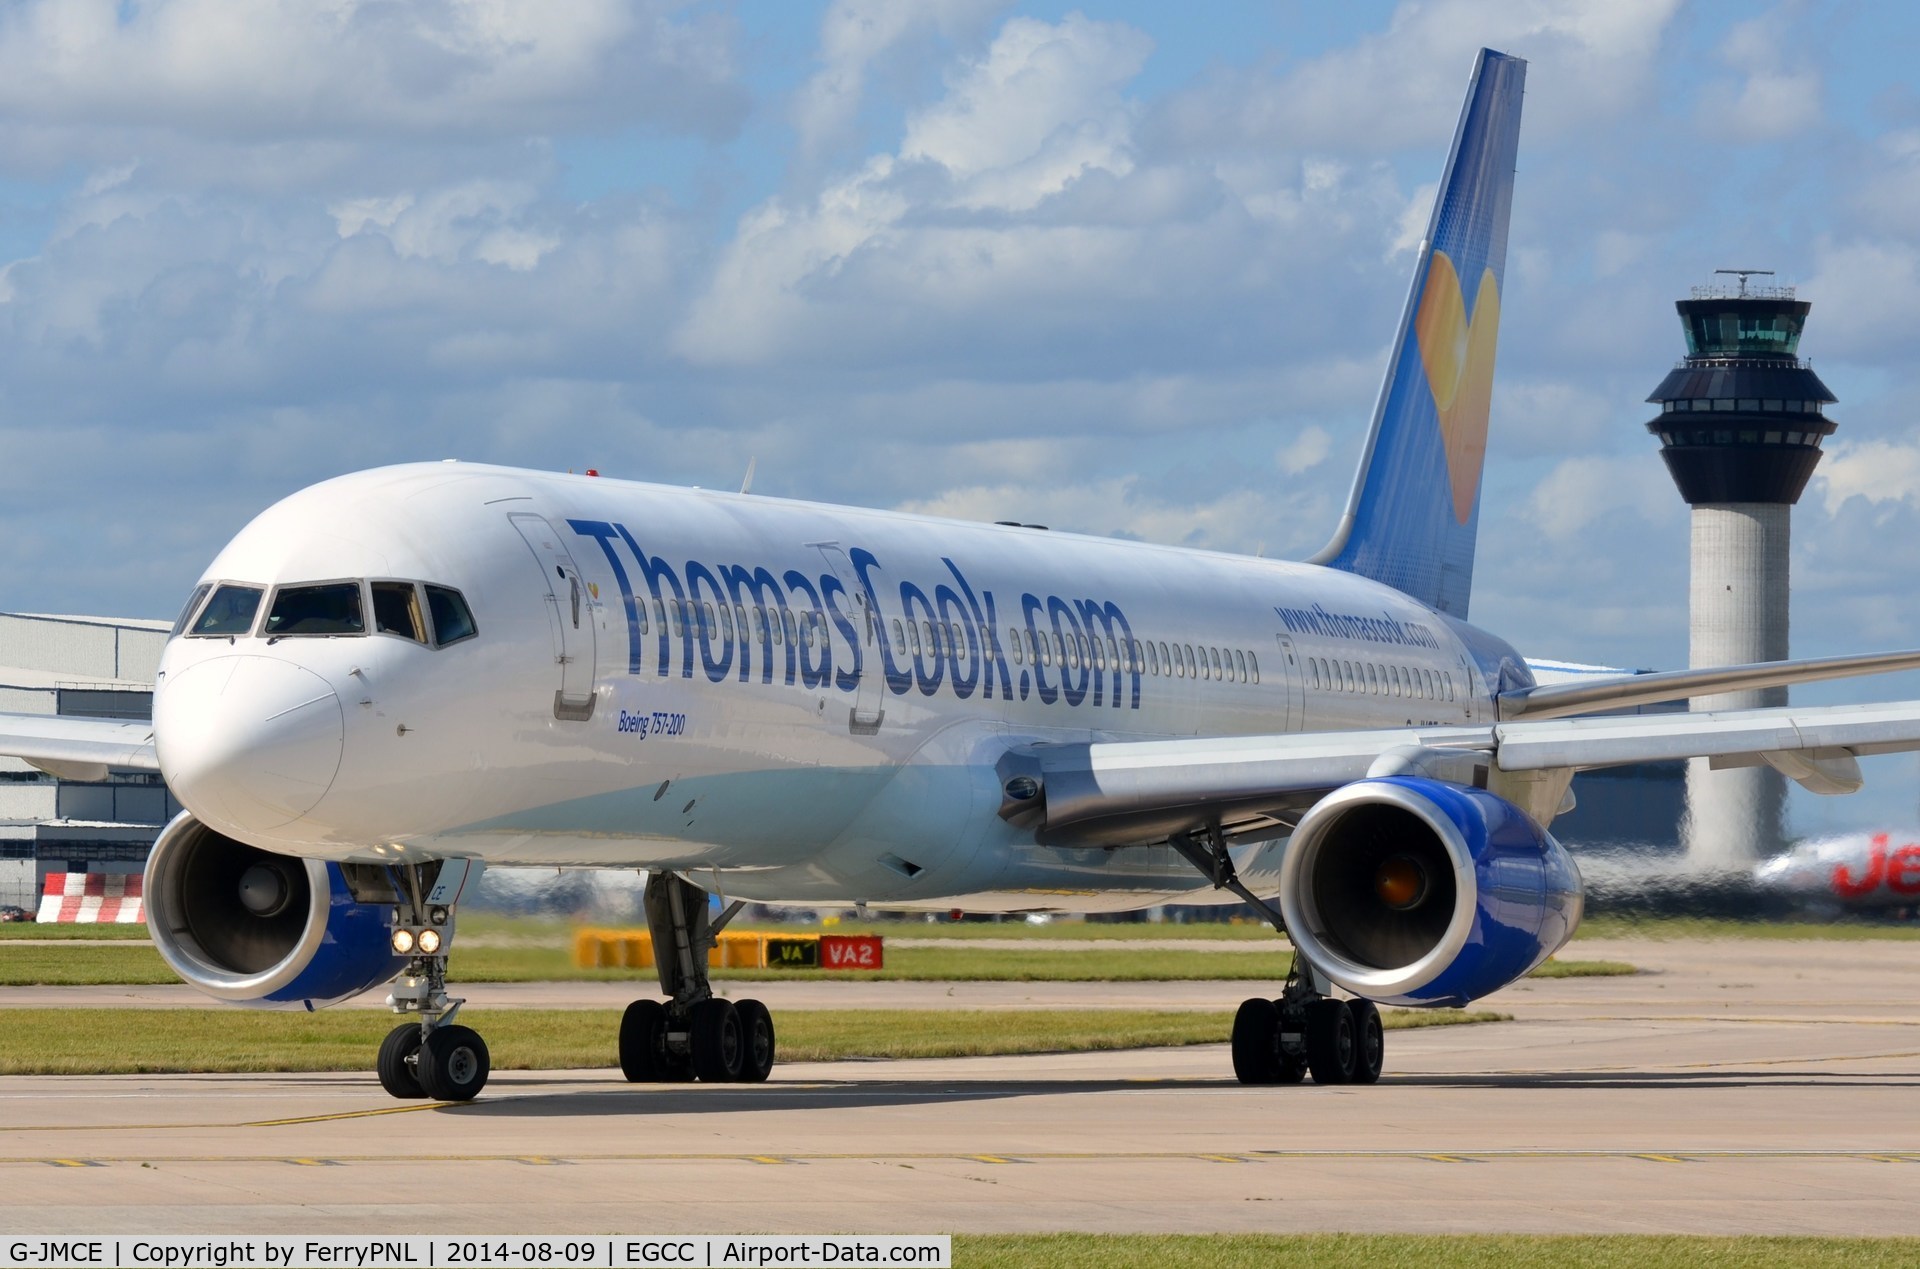 G-JMCE, 2000 Boeing 757-25F C/N 30758, Thomas Cook B752 lining-up. Now operating cargo flights in China for SF Airlines.